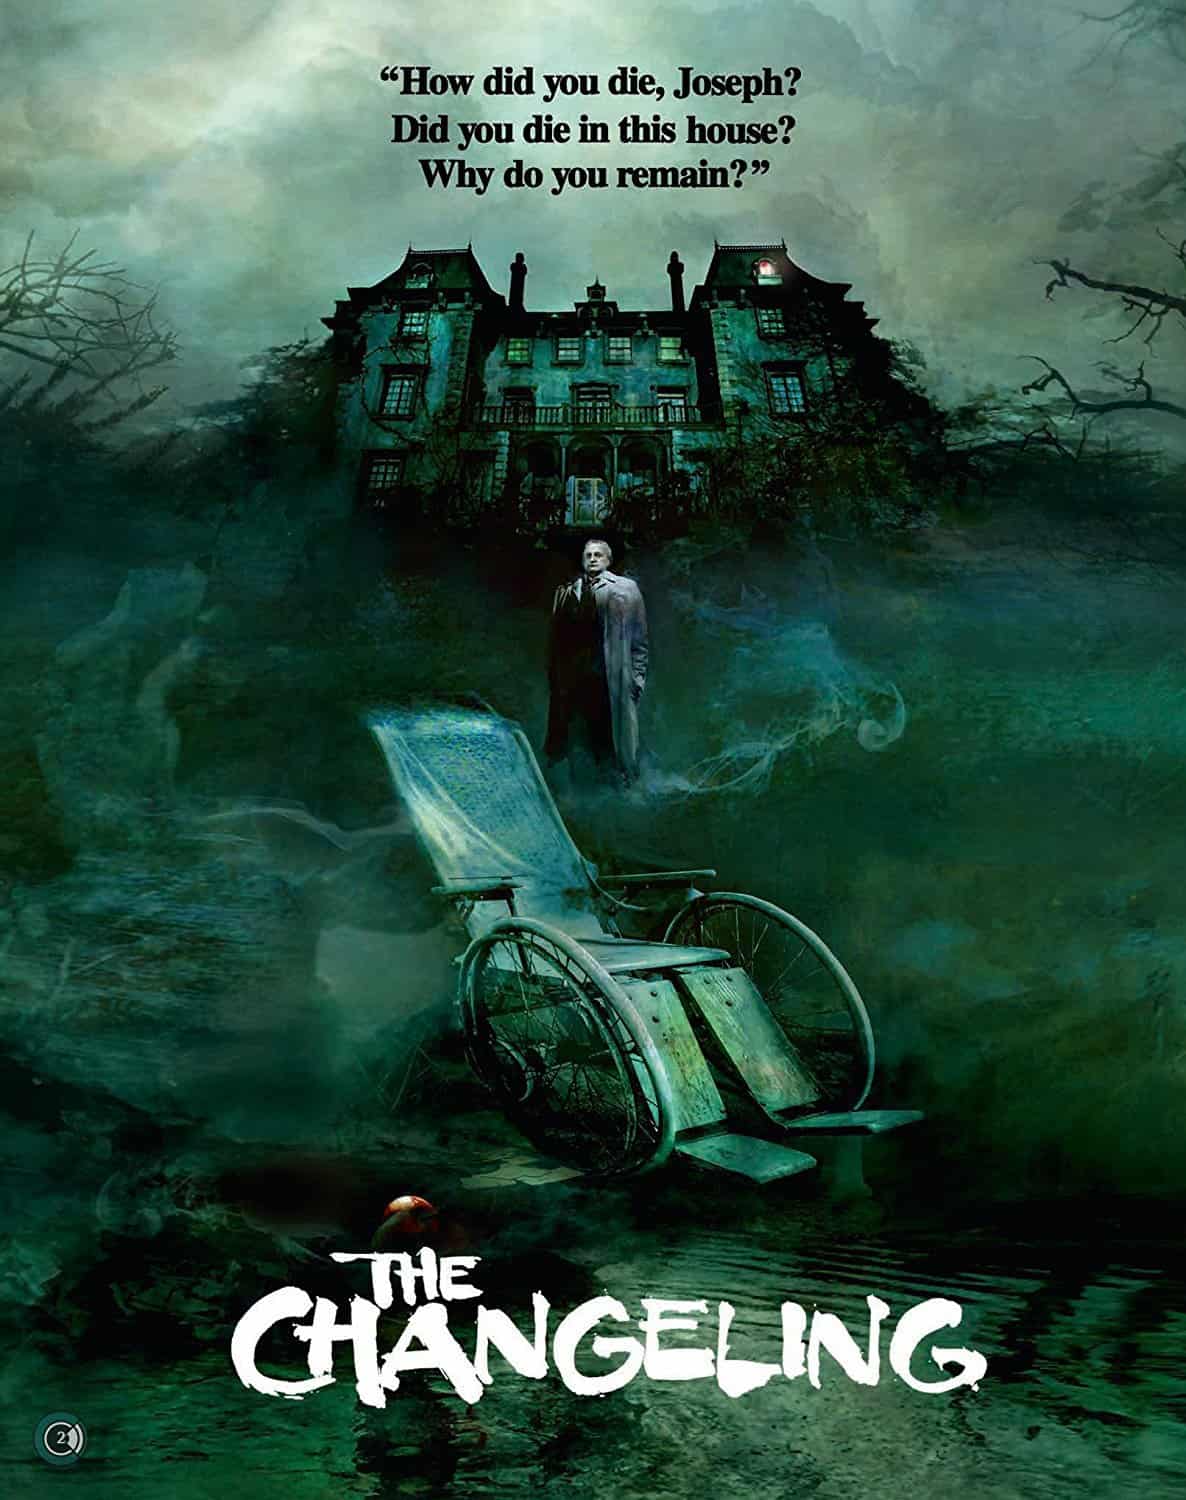 The Changeling (1980) Blu-Ray Review